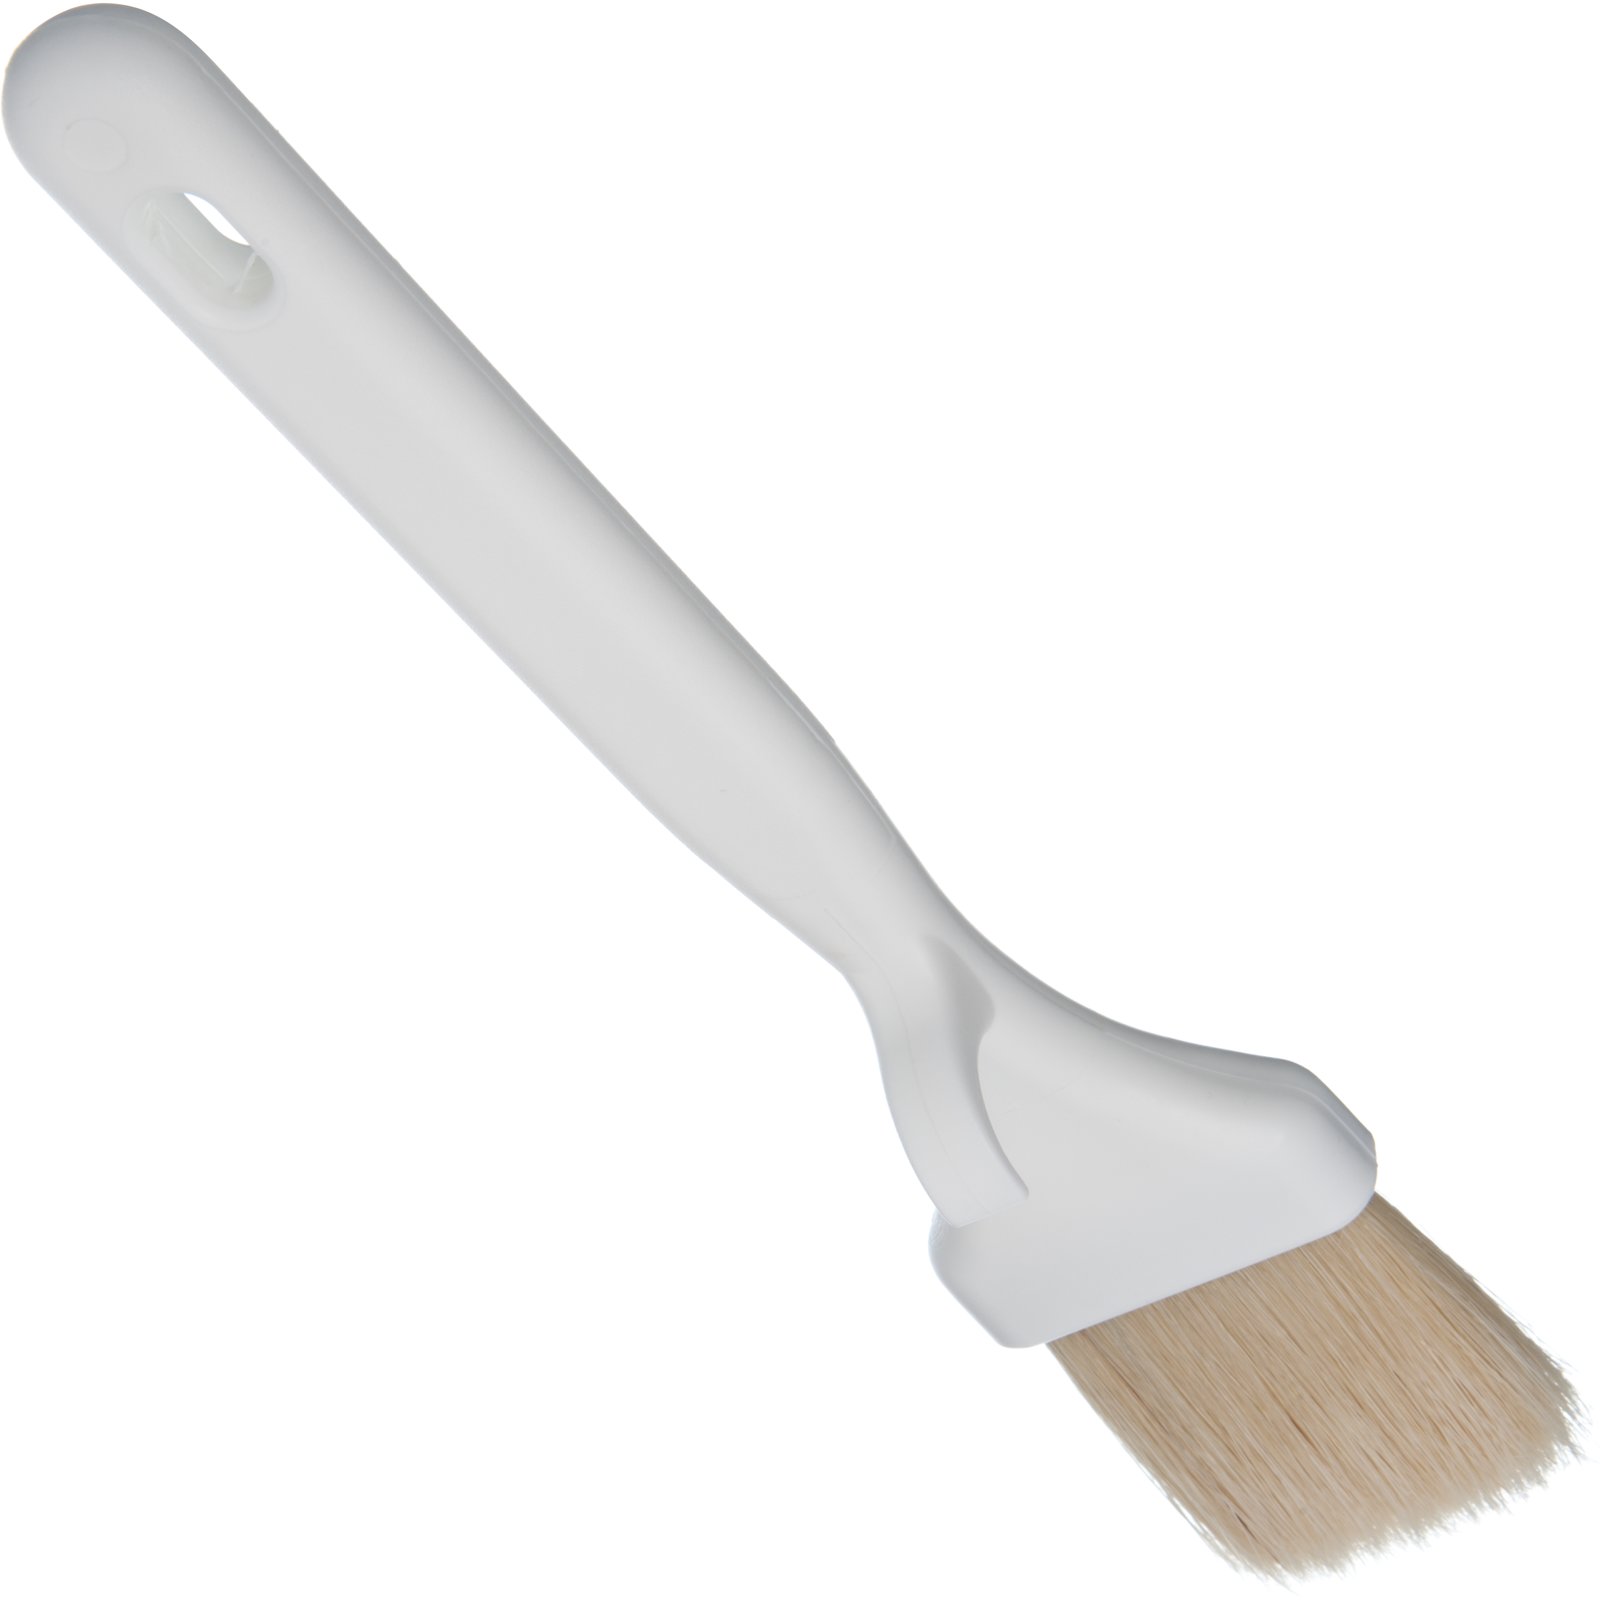 3-Piece Polyester Bristle Varnish & Sash Paint Brush Set - Danbury, CT -  New Milford, CT - Agriventures Agway Pickup & Delivery